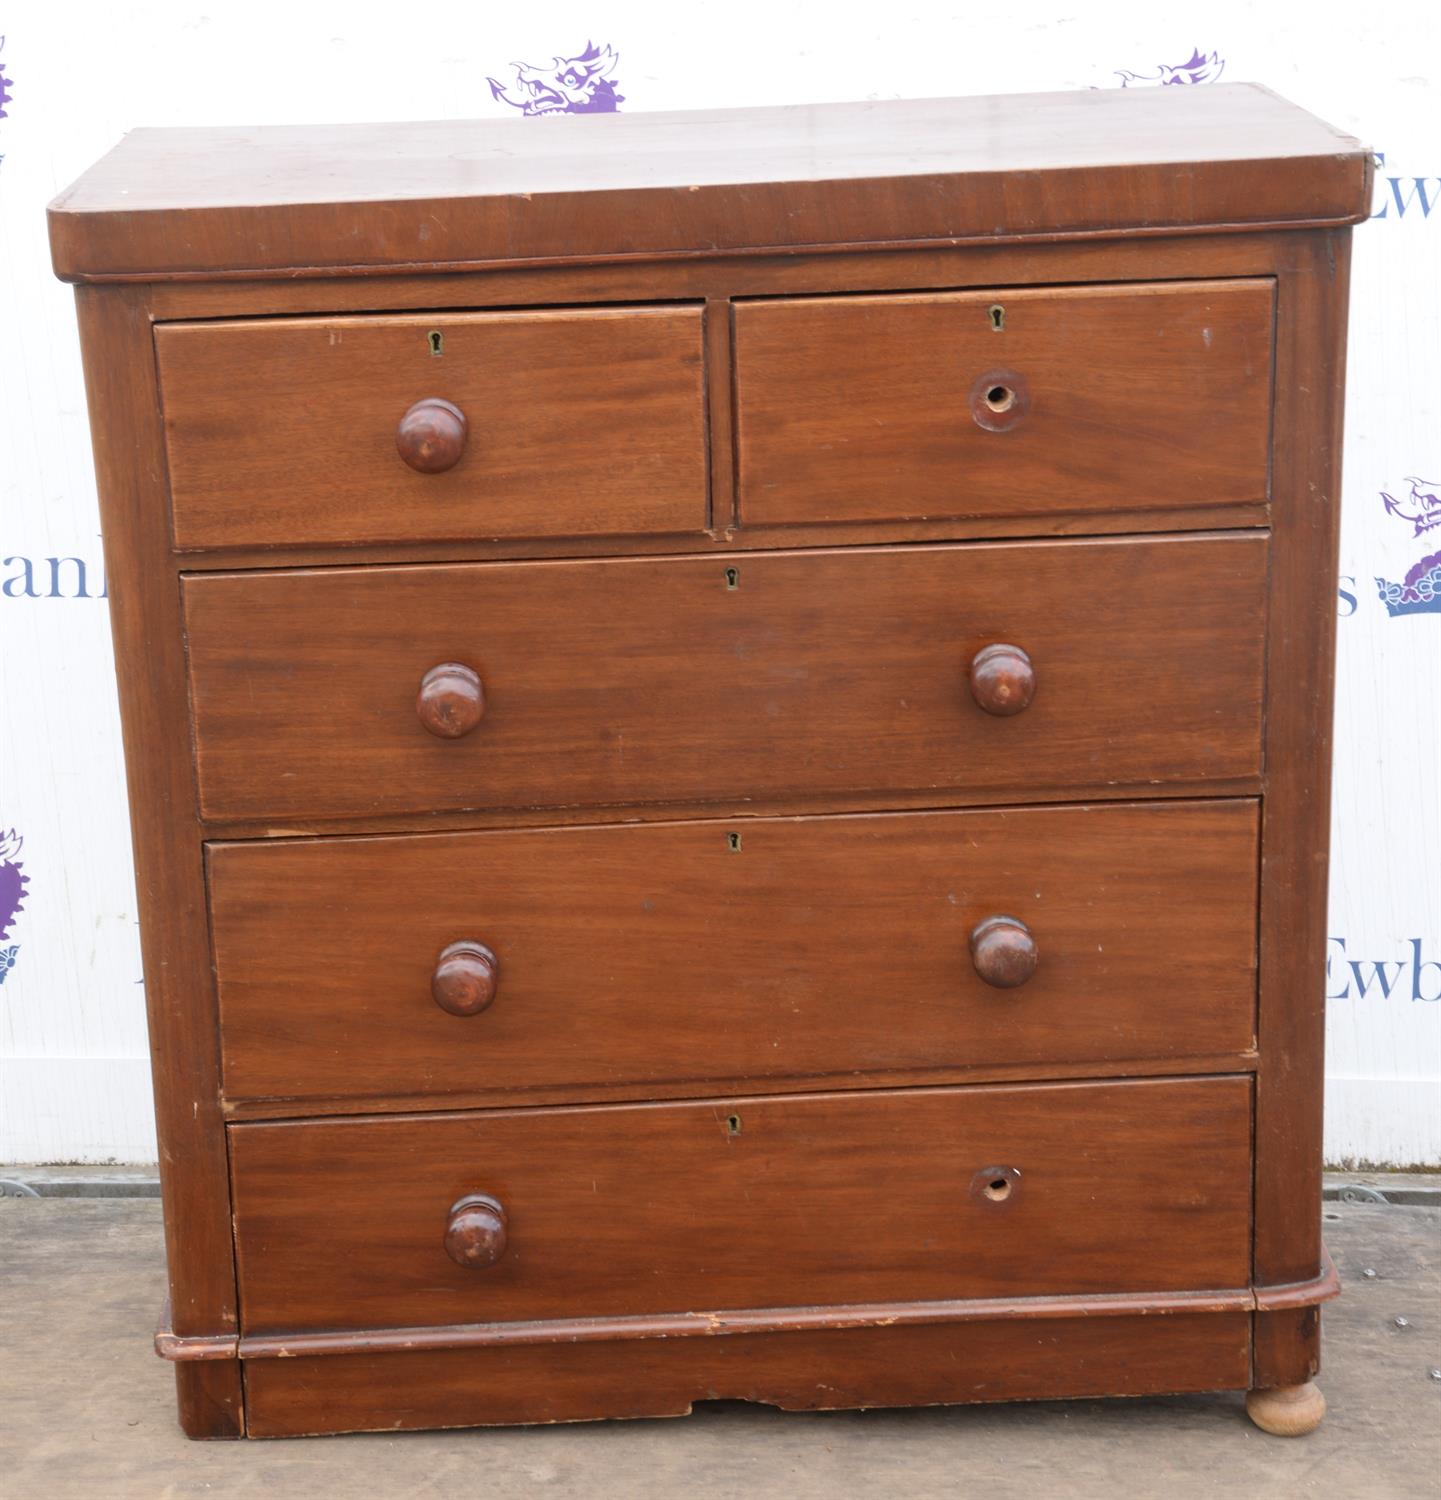 A Victorian mahogany chest of drawers, with two short drawers and two long drawers,